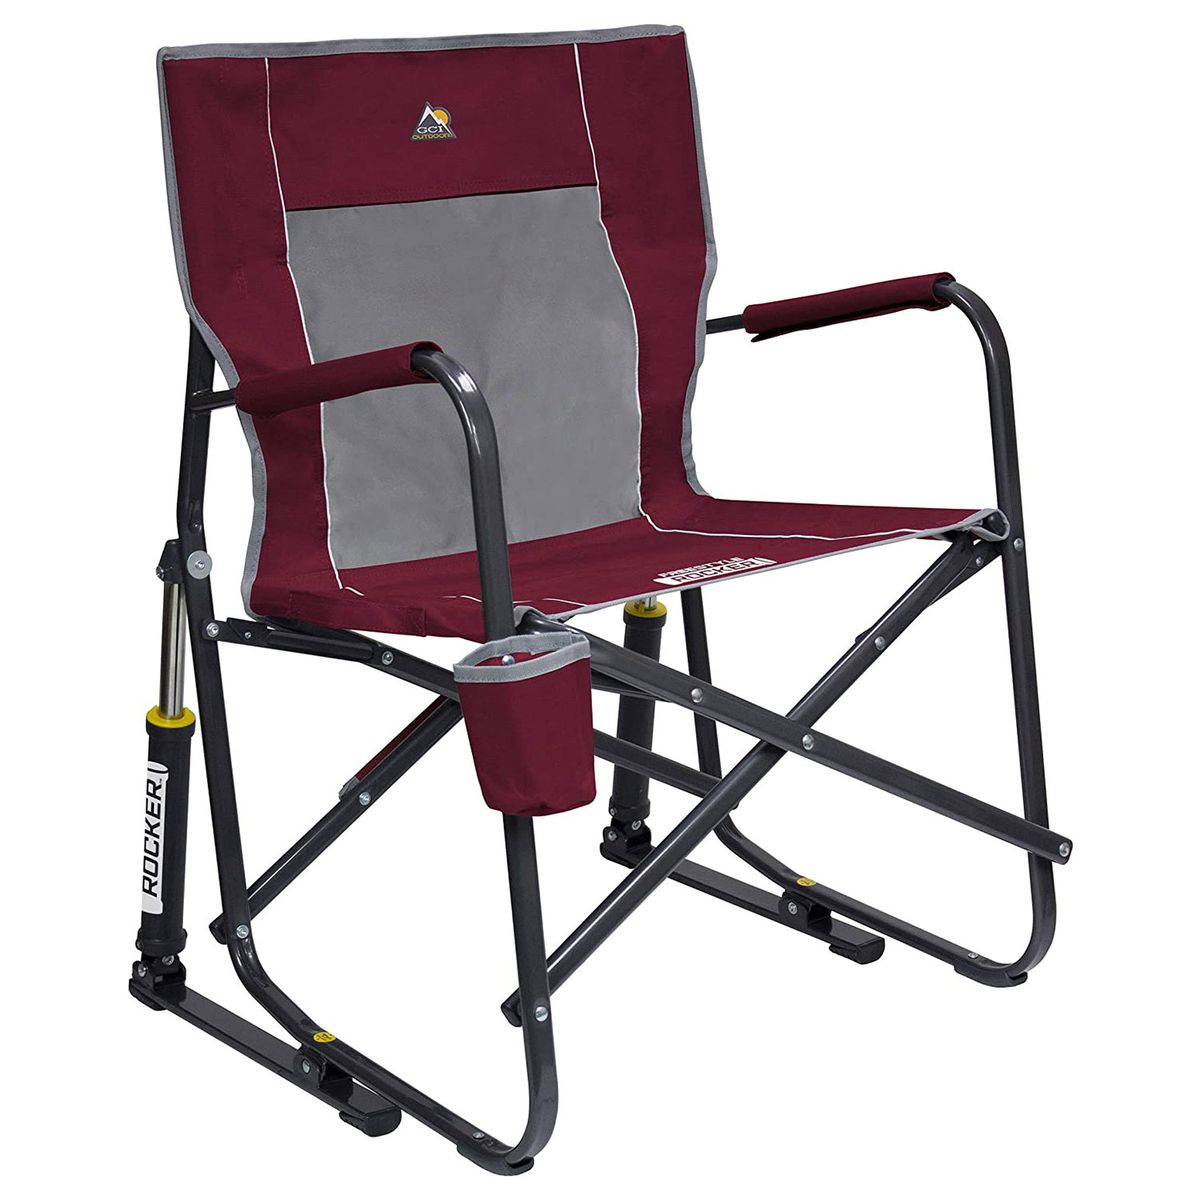 Best for Rocking on Any Kind of Ground: GCI Outdoor Freestyle Rocker Chair